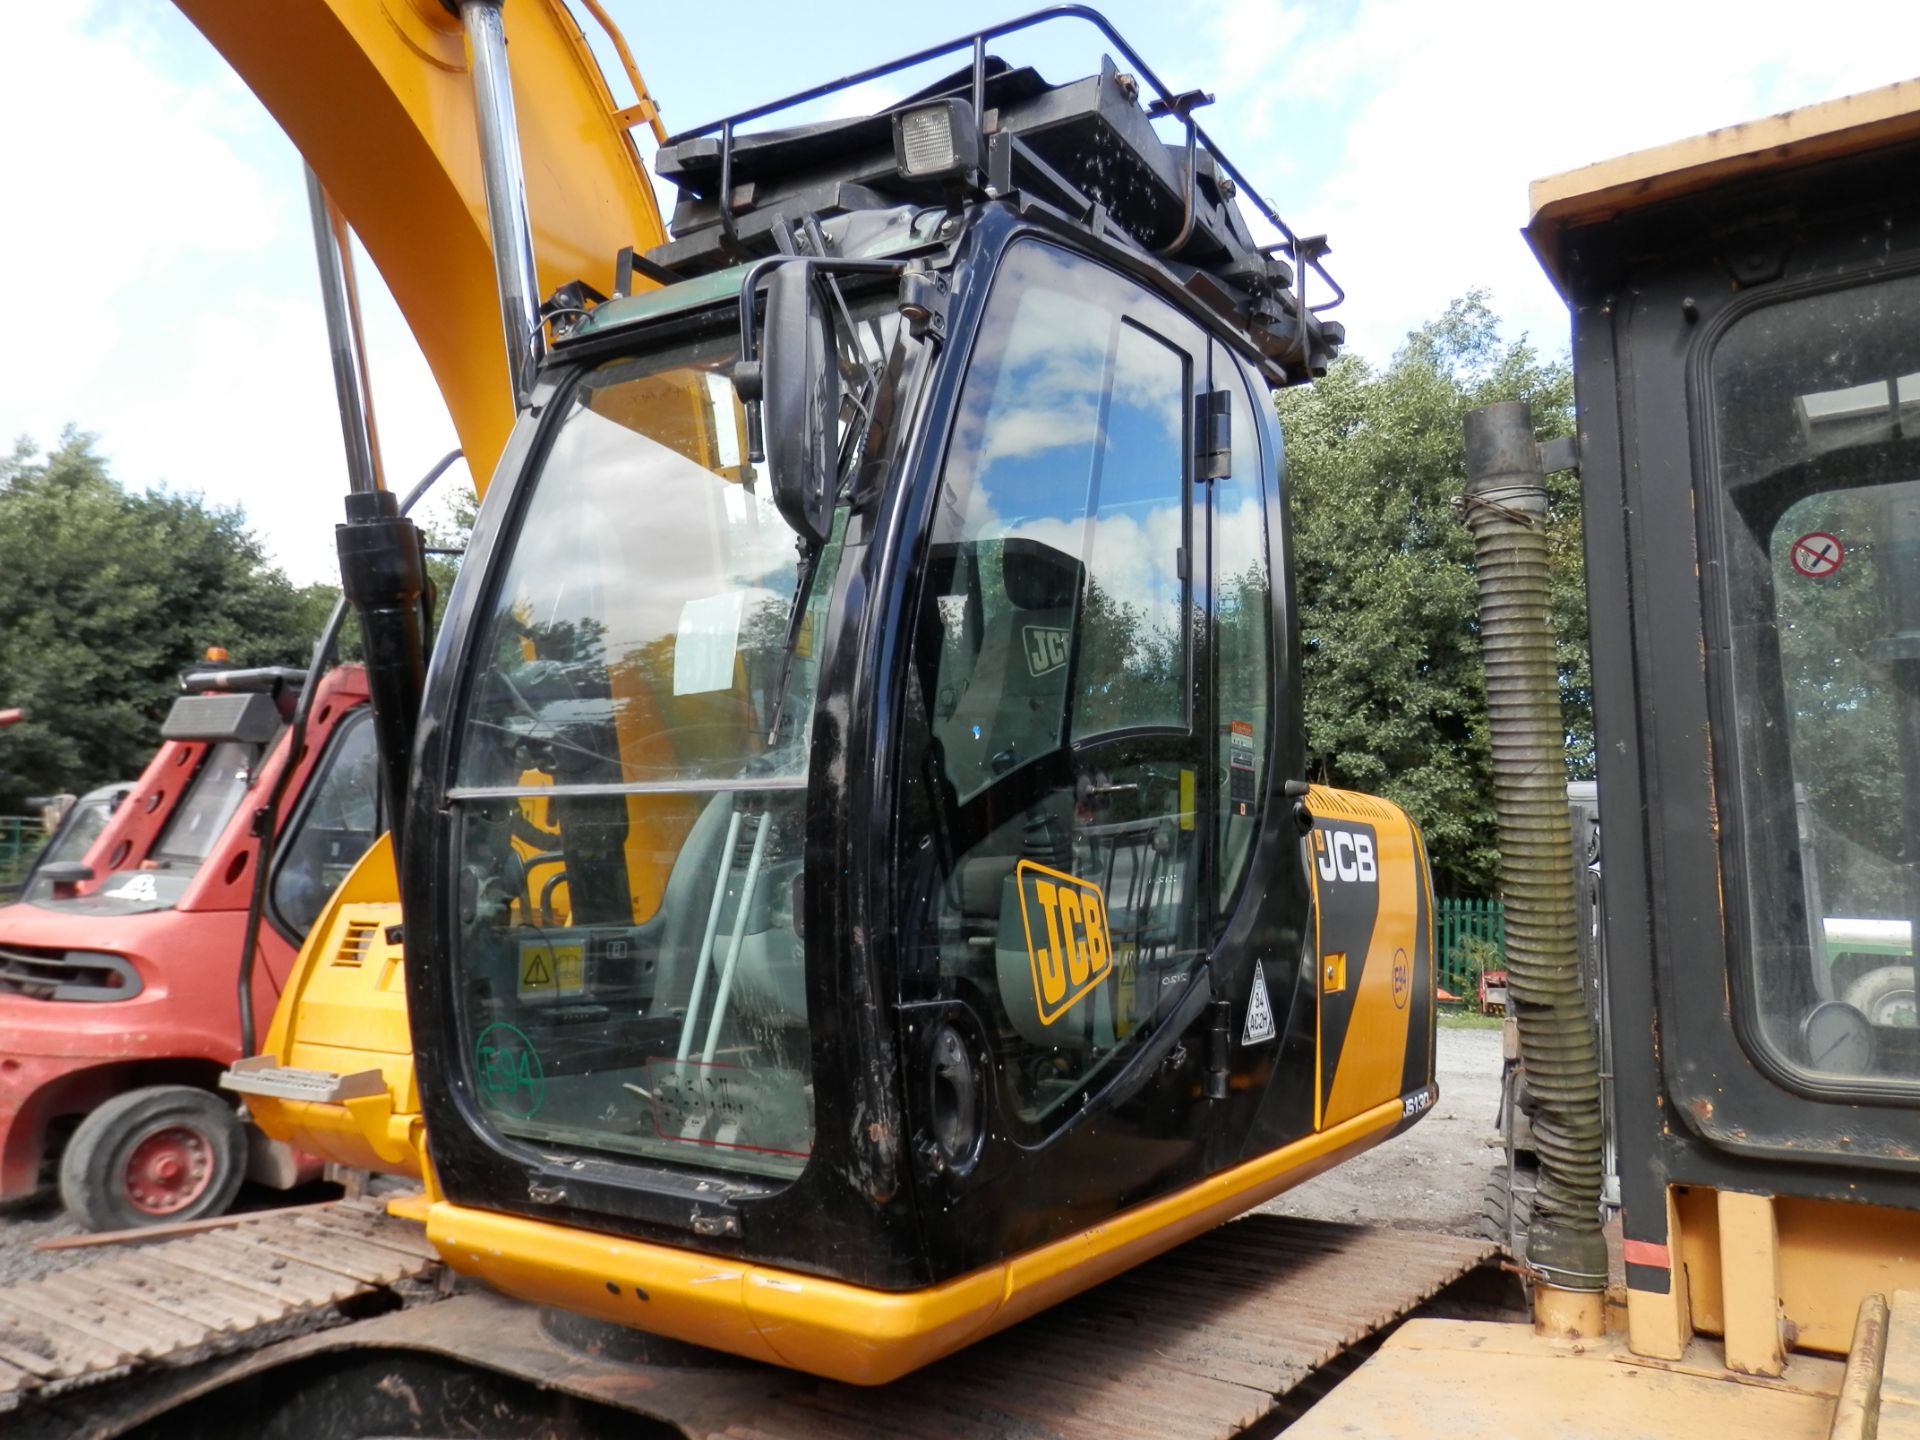 2010 JCBJS130 13.4 TONNE TRACKED DIGGER, ALL WORKING READY FOR WORK. 7806 WORKING HOURS. - Image 2 of 12